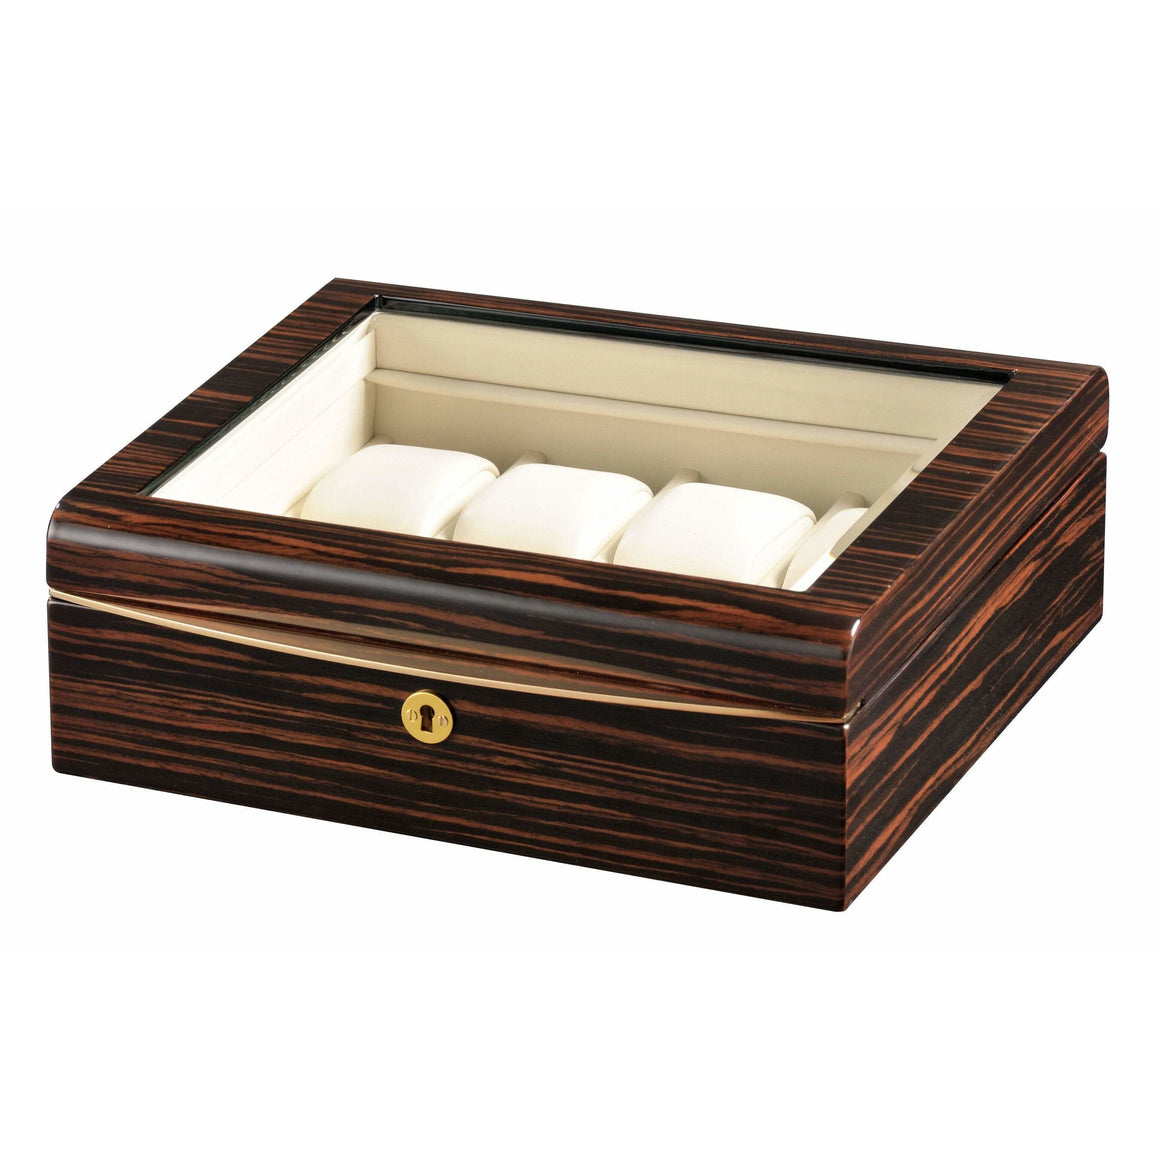 Volta Watch Case Volta - 31560942 8 Watch Case with Gold Accents and Cream Leather Interior and See Through Top- Ebony Wood